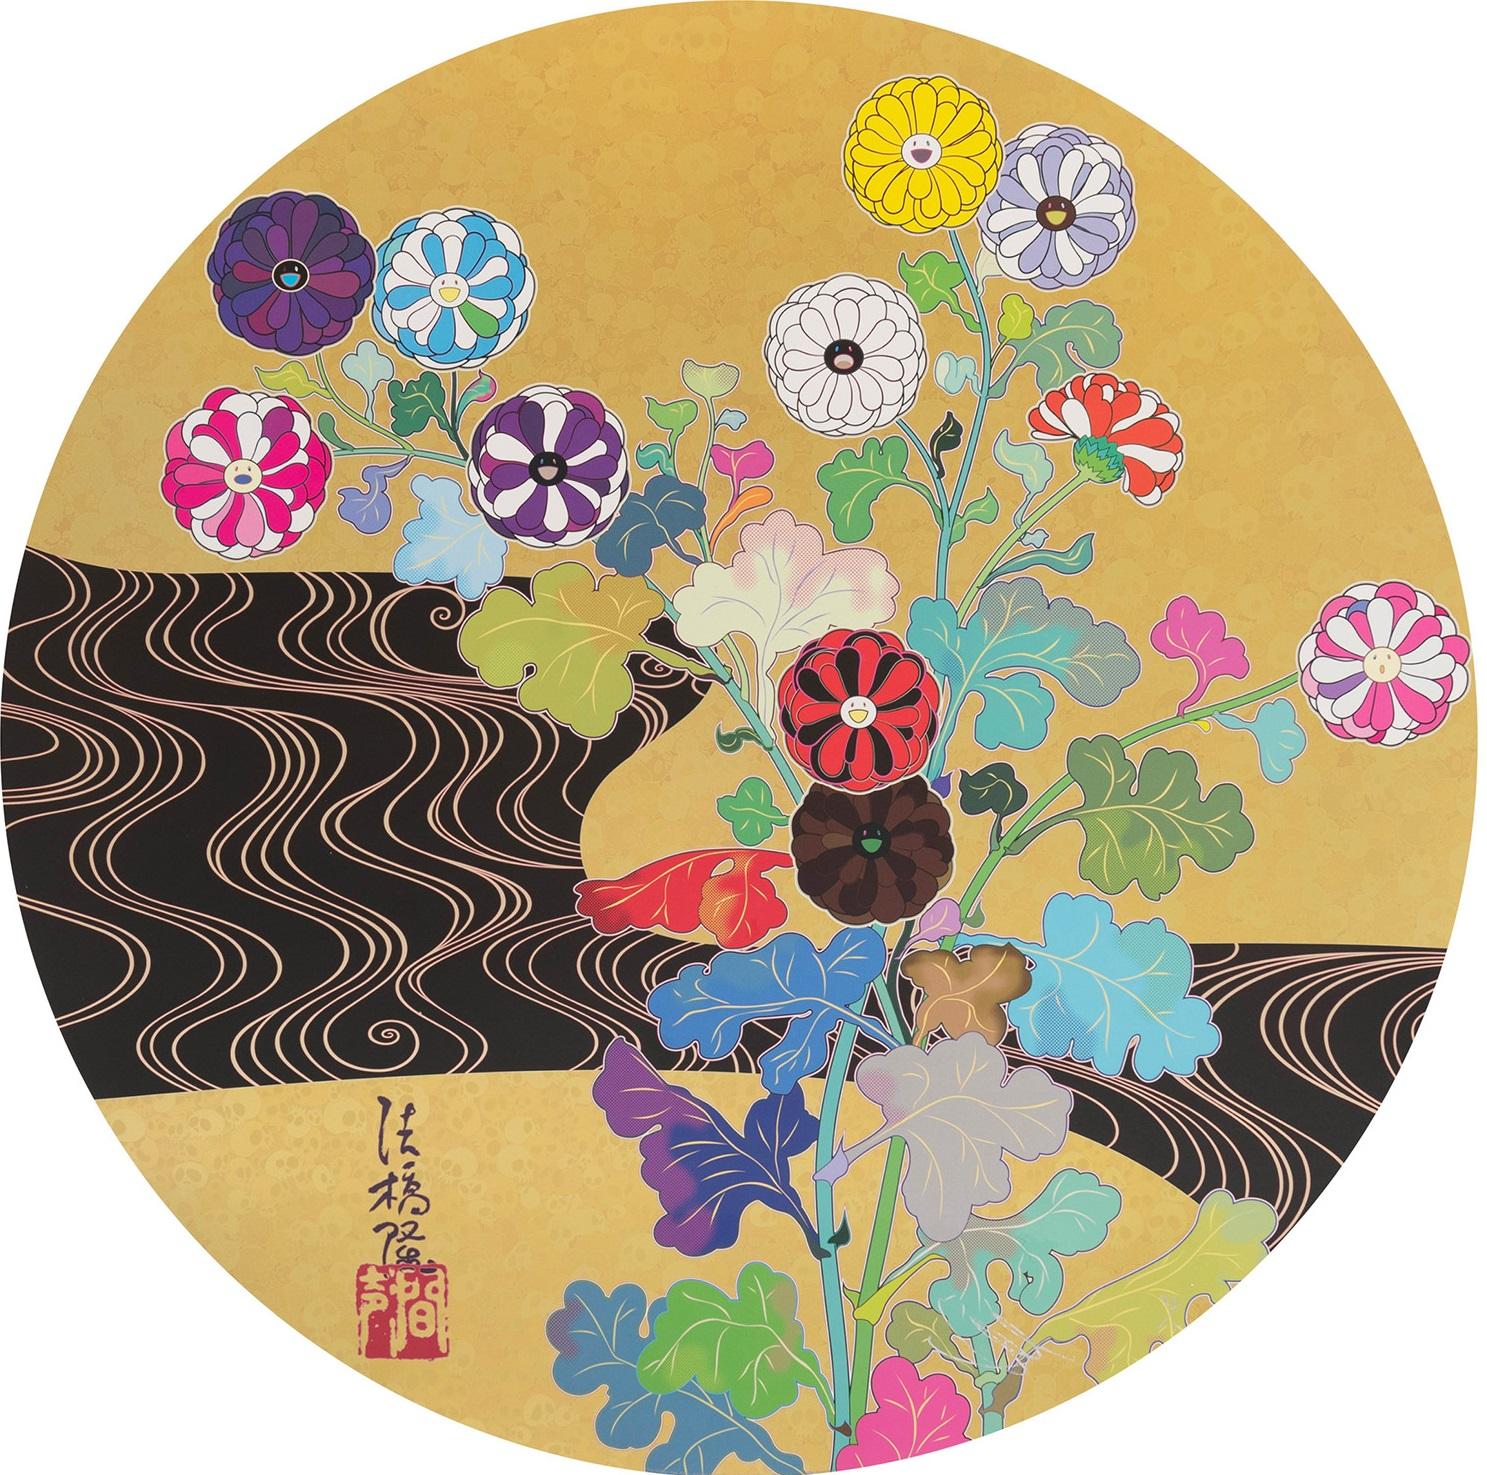 Takashi Murakami Figurative Print - The Golden Age: Kōrin  Limited Edition (print) by Murakami signed, numbered 